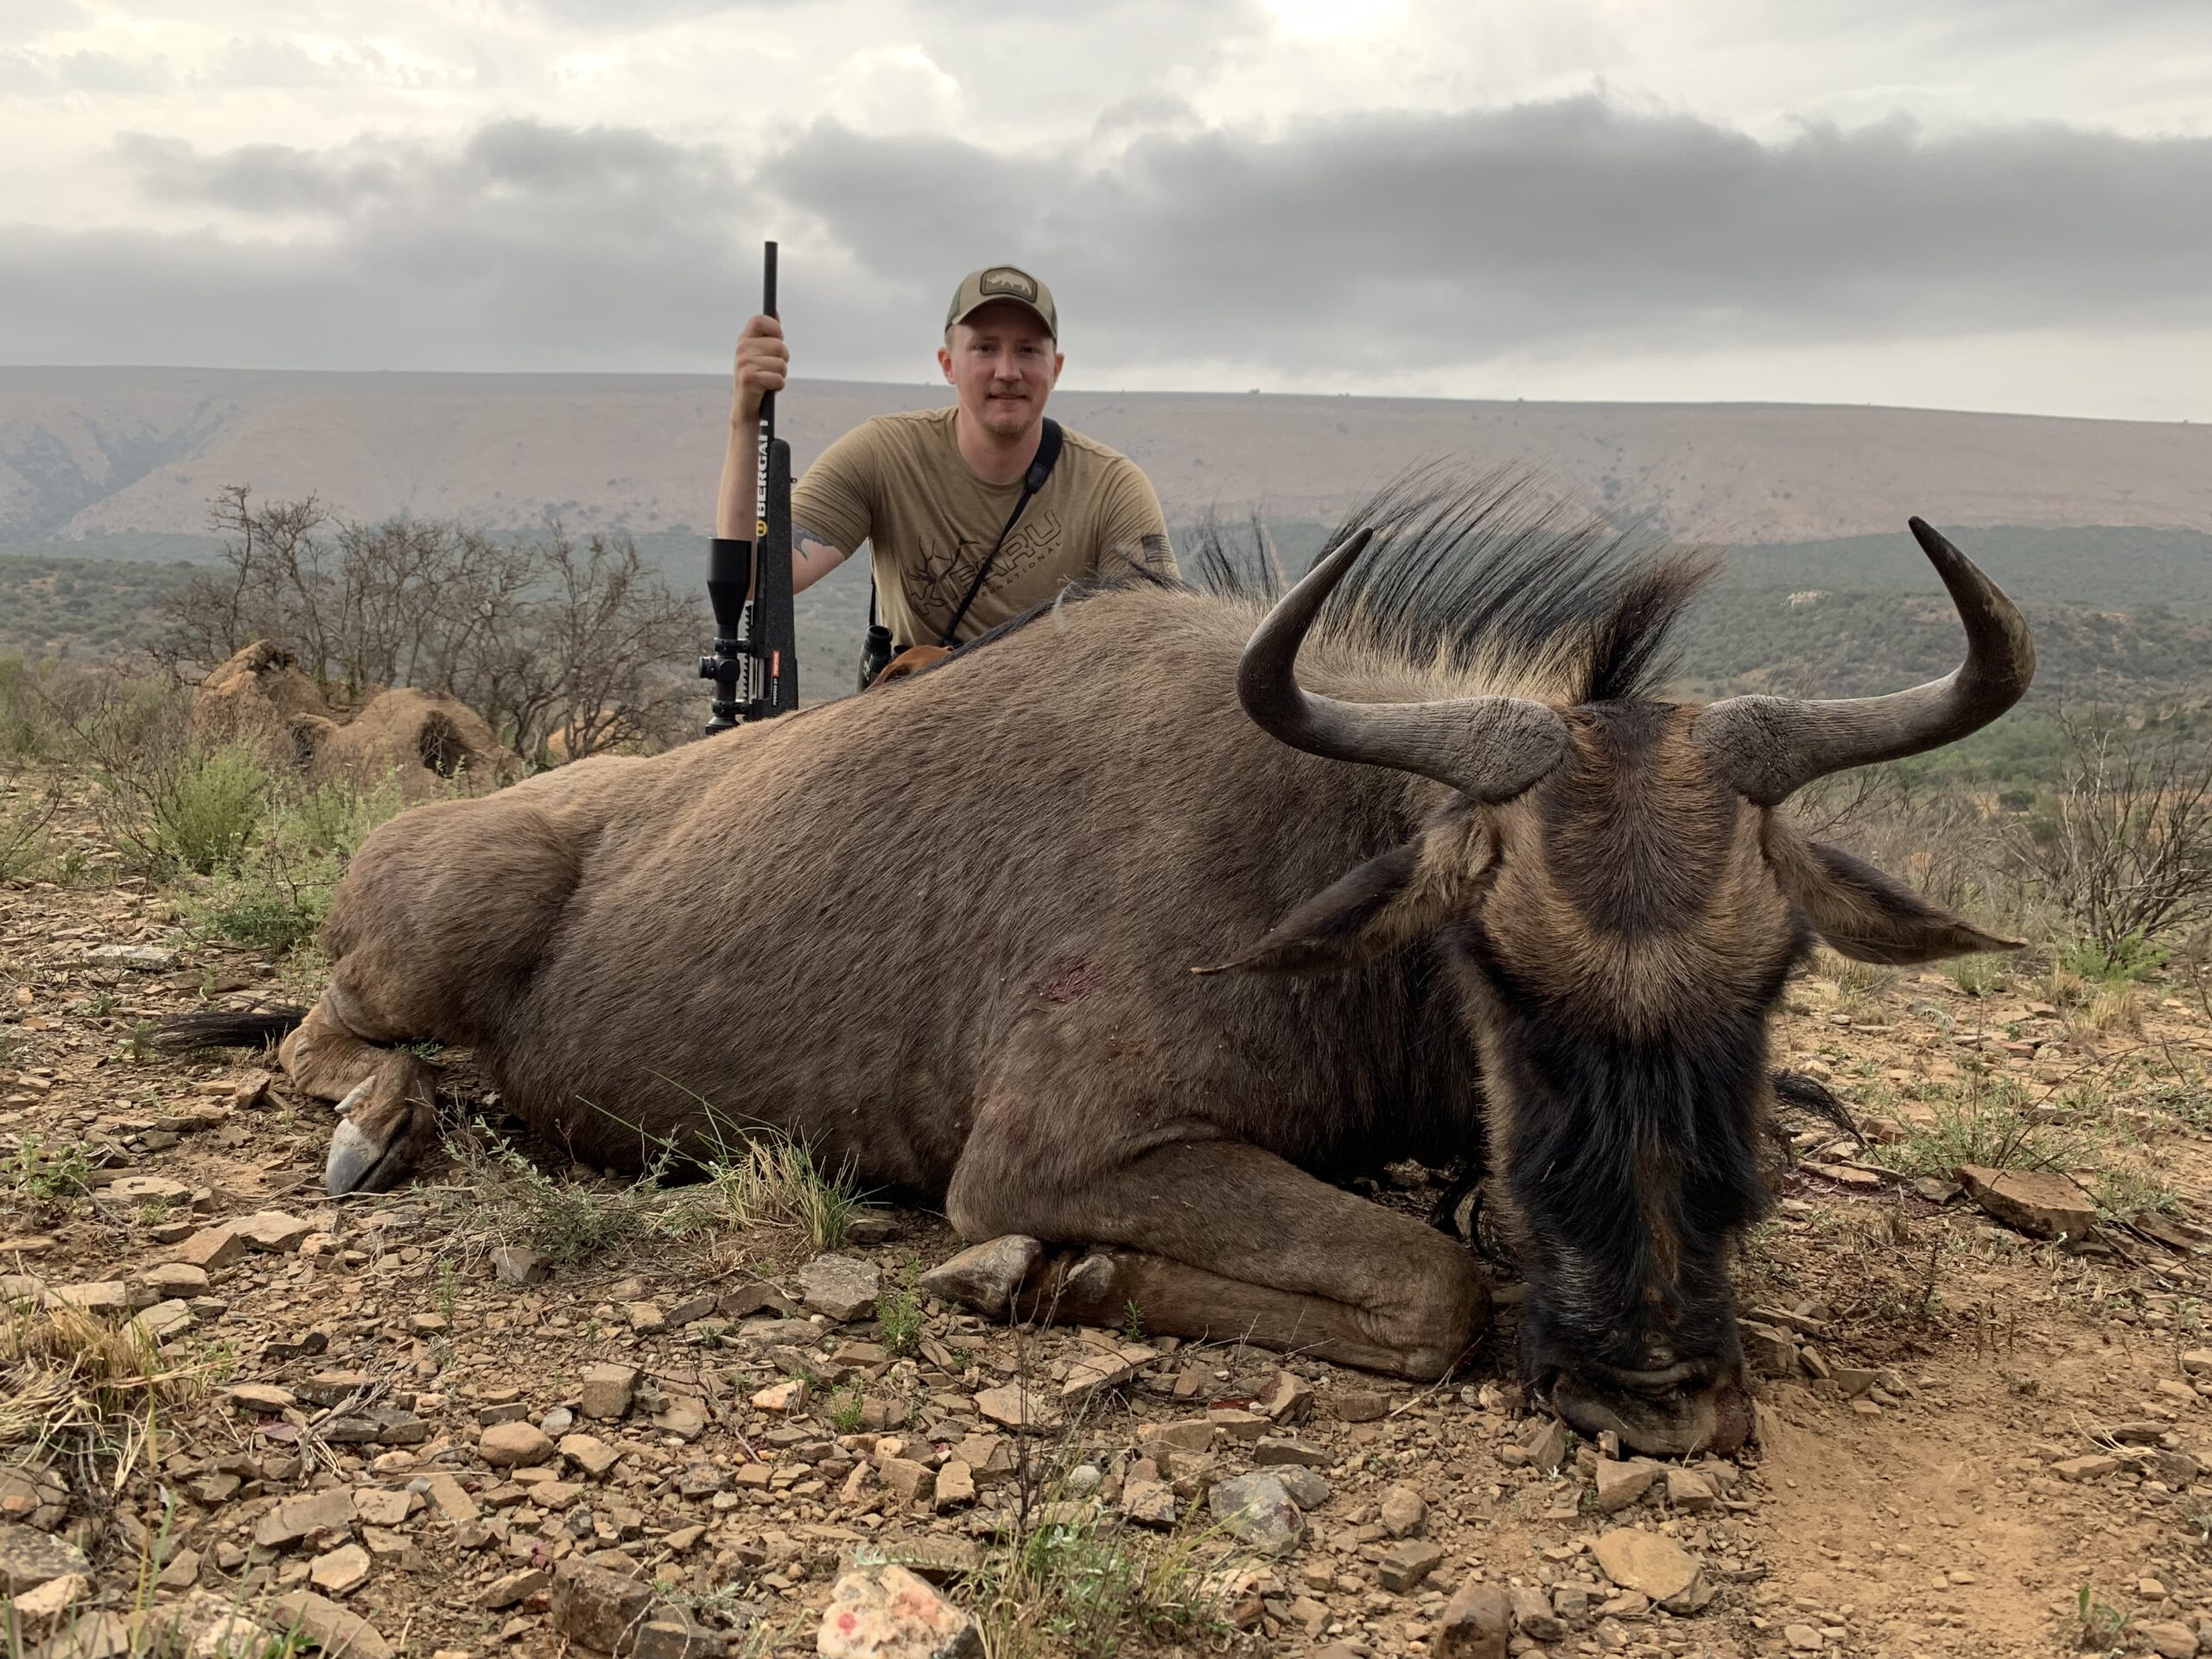 Freel with a South African Wildebeest